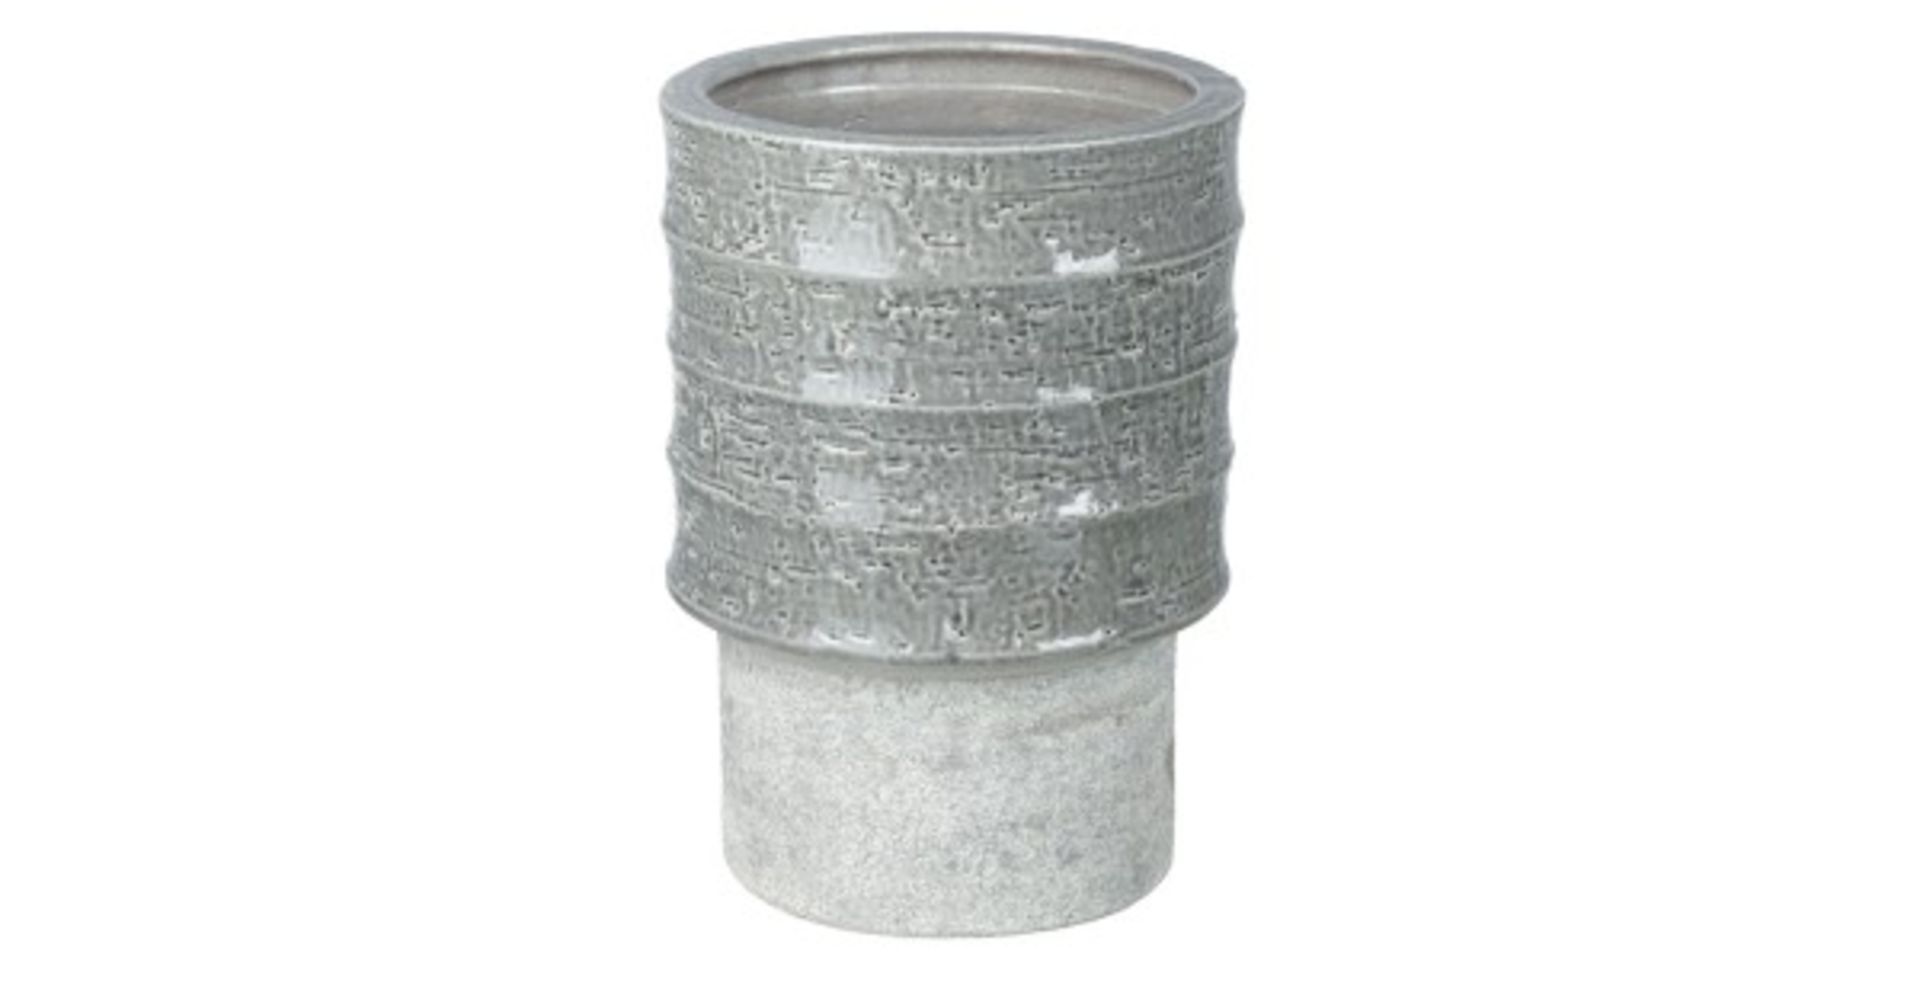 Ripple planter Grey 250x230mmh Brand New Parlane Accessories We take our product seriously and